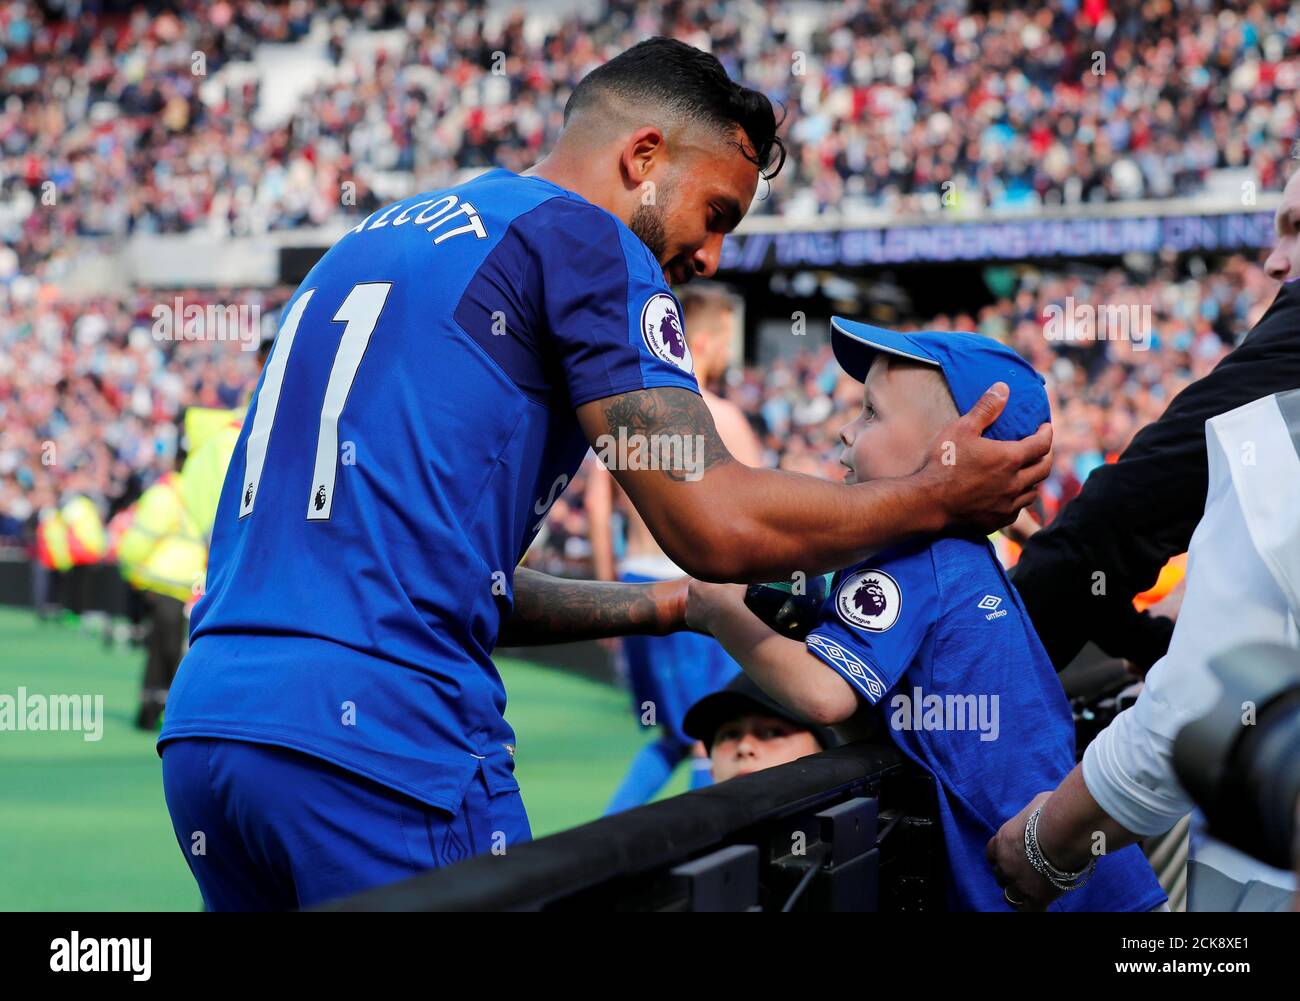 Soccer Football - Premier League - West Ham United vs Everton - London Stadium, London, Britain - May 13, 2018   Everton's Theo Walcott with a fan after the match   REUTERS/Eddie Keogh    EDITORIAL USE ONLY. No use with unauthorized audio, video, data, fixture lists, club/league logos or 'live' services. Online in-match use limited to 75 images, no video emulation. No use in betting, games or single club/league/player publications.  Please contact your account representative for further details. Stock Photo